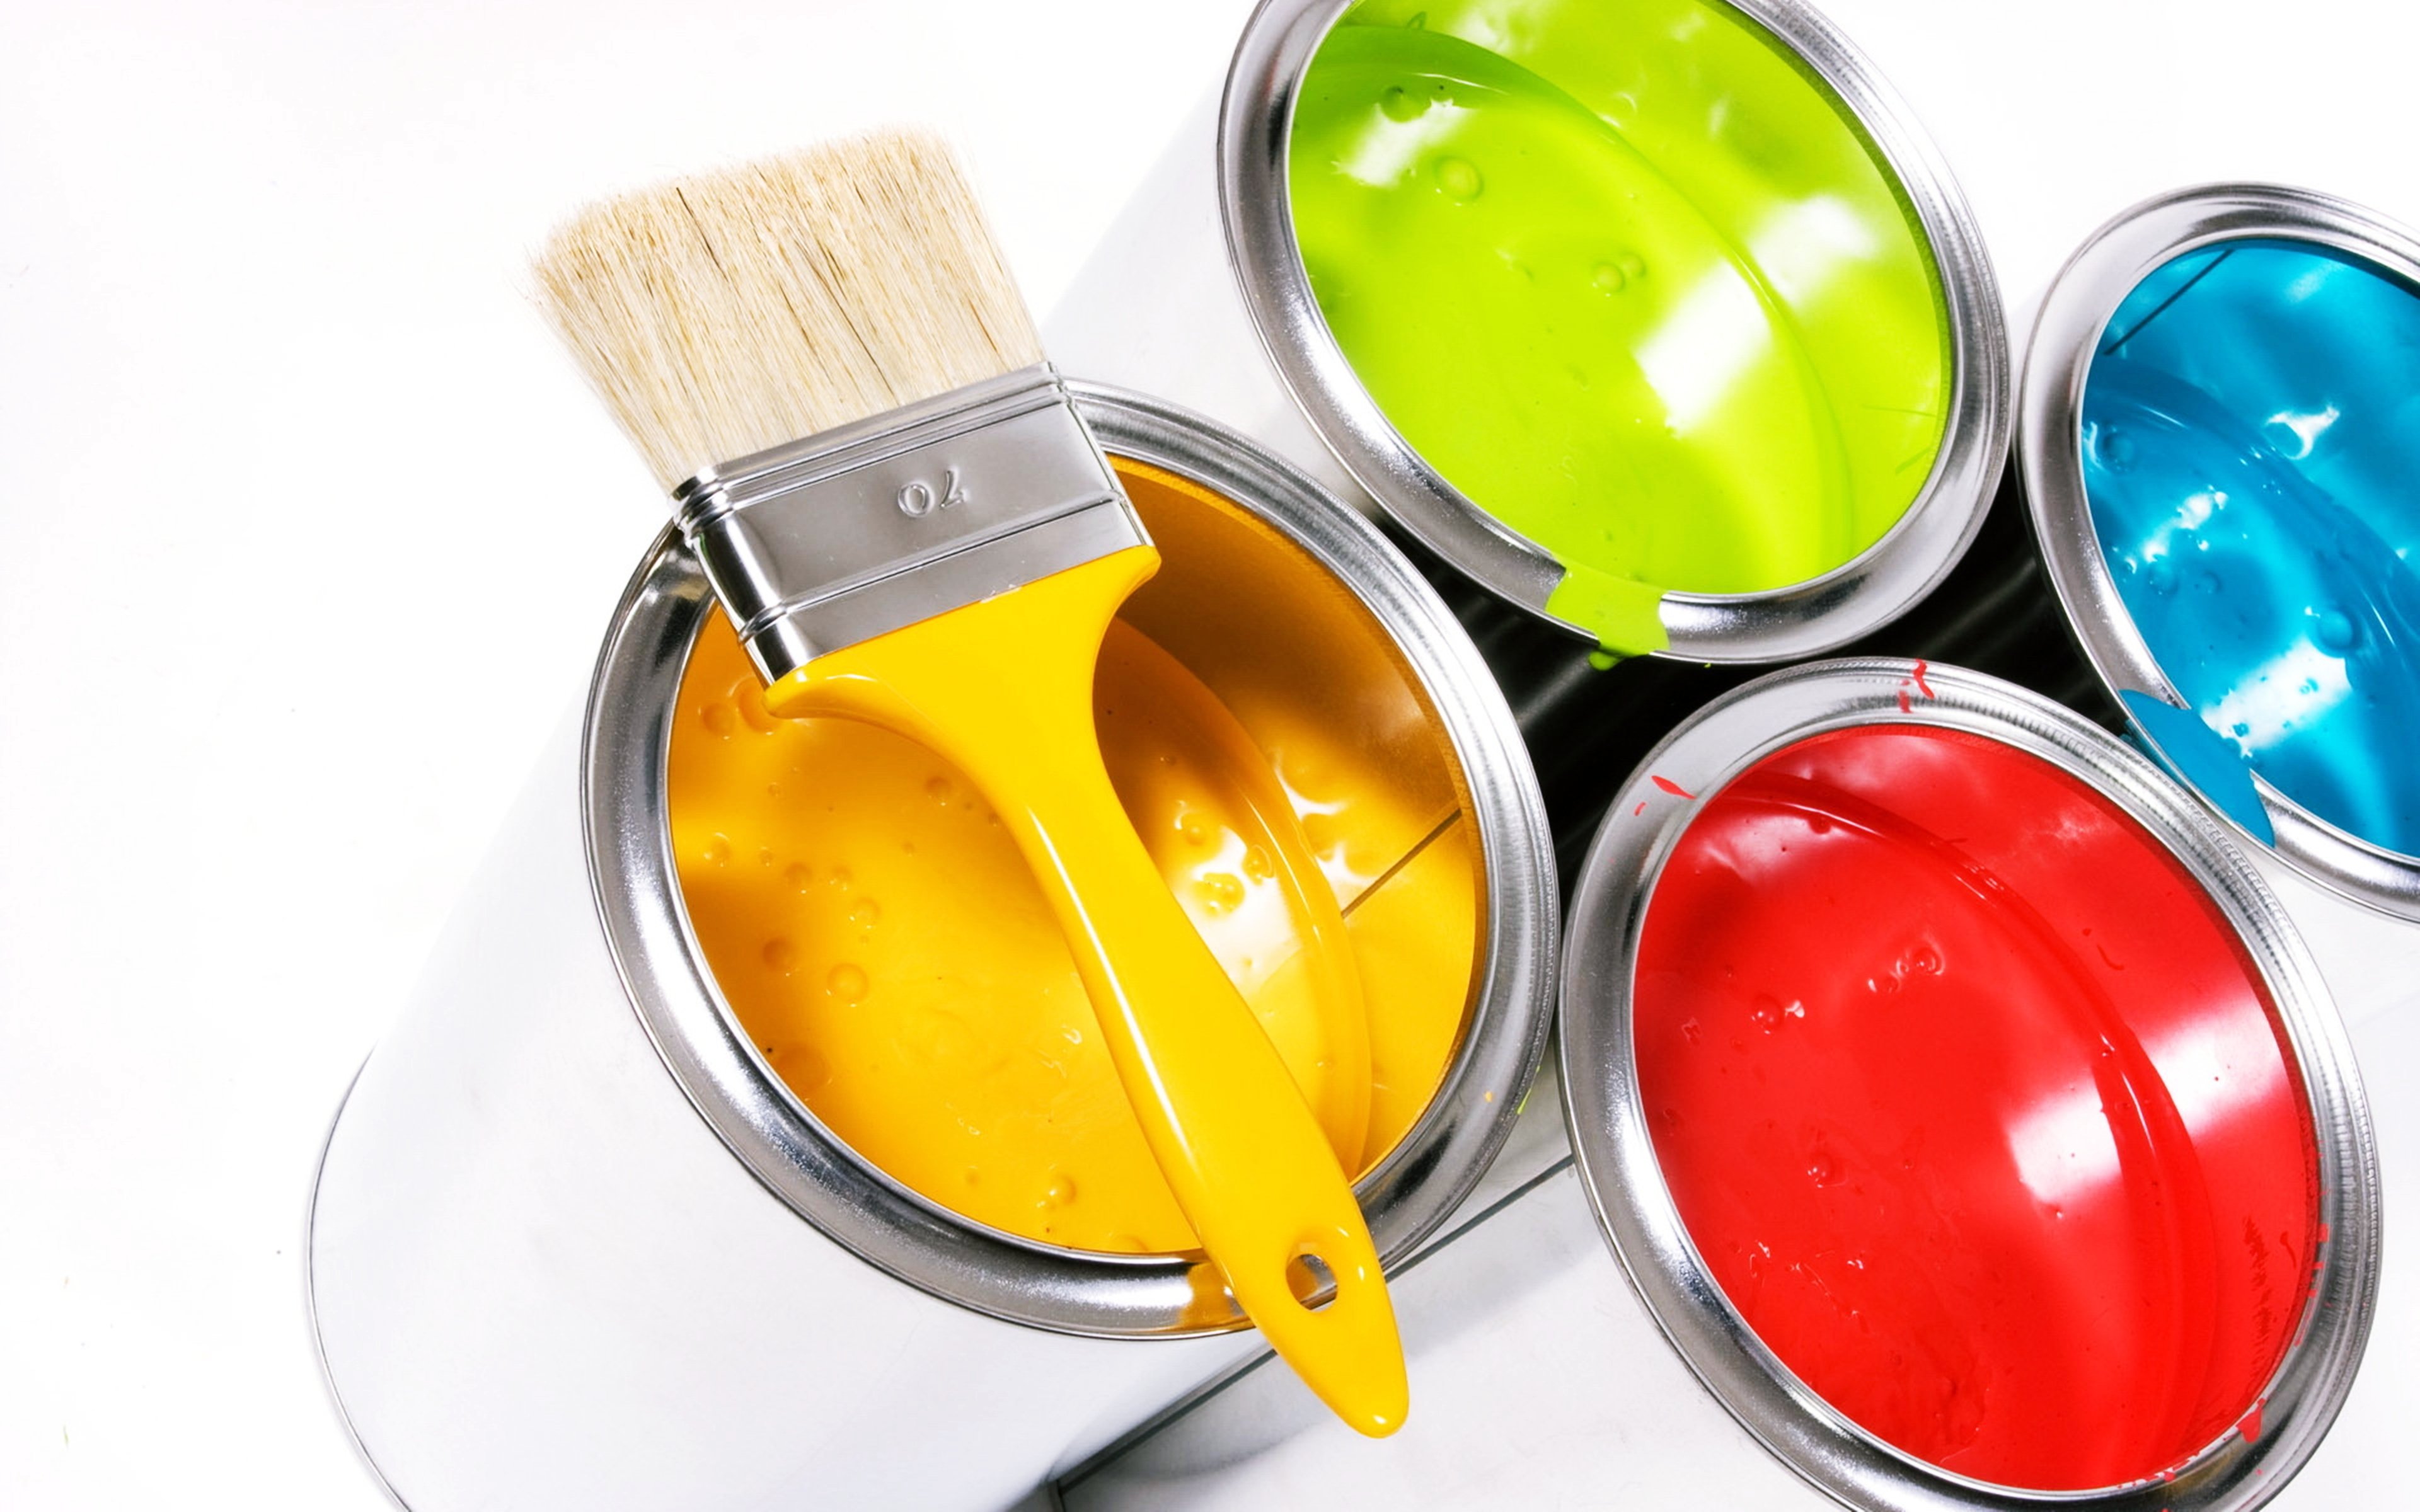 colors, Dyes, Buckets, Painting, Daubing, Varnishing, Yellow, Red, Blue, Green Wallpaper